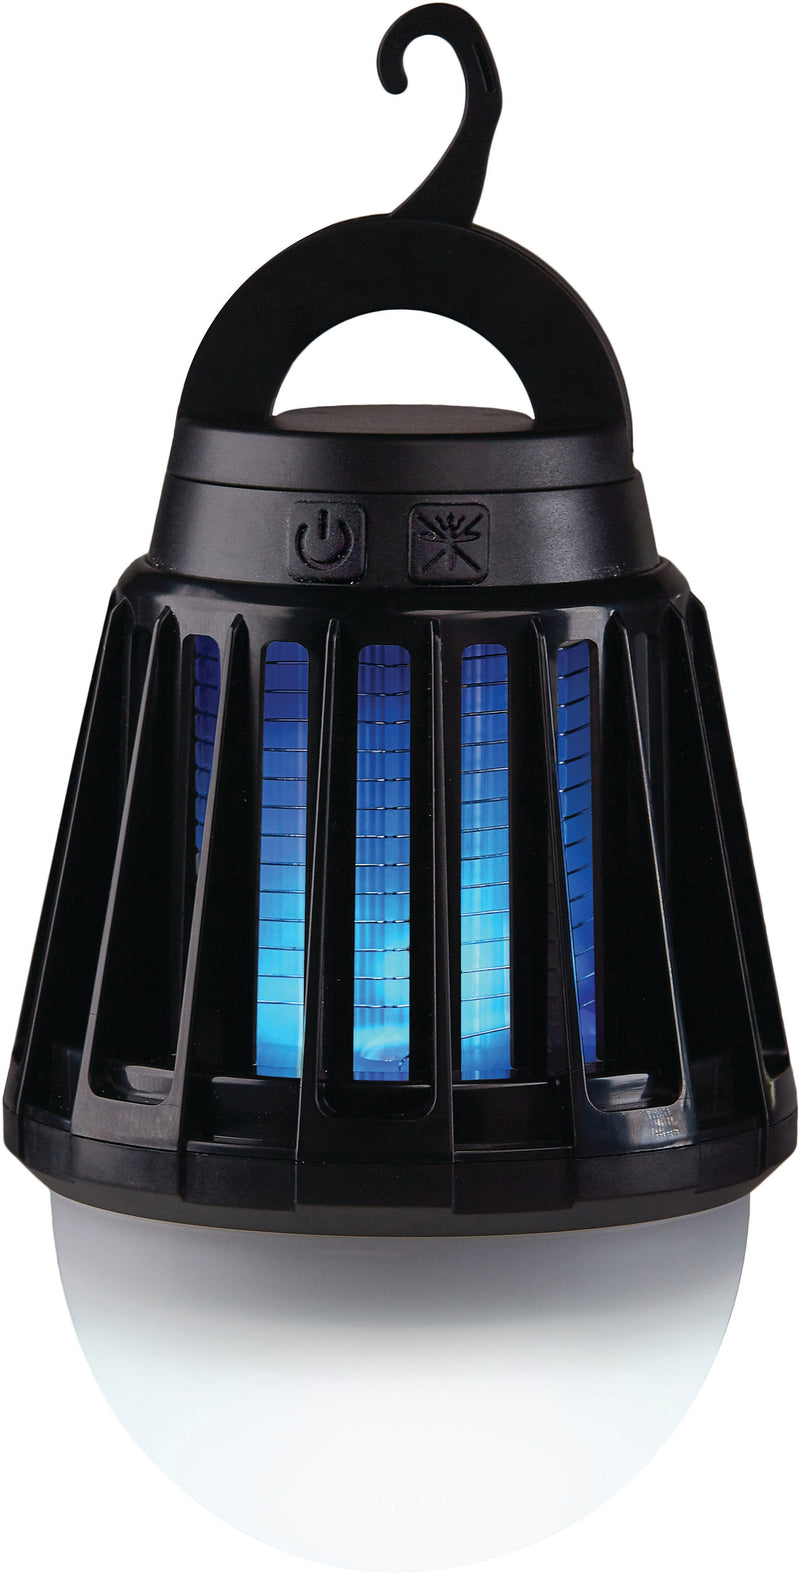 Load image into Gallery viewer, Pic Corp Portable Lantern and Zapper: Illuminate and Protect Outdoors!
